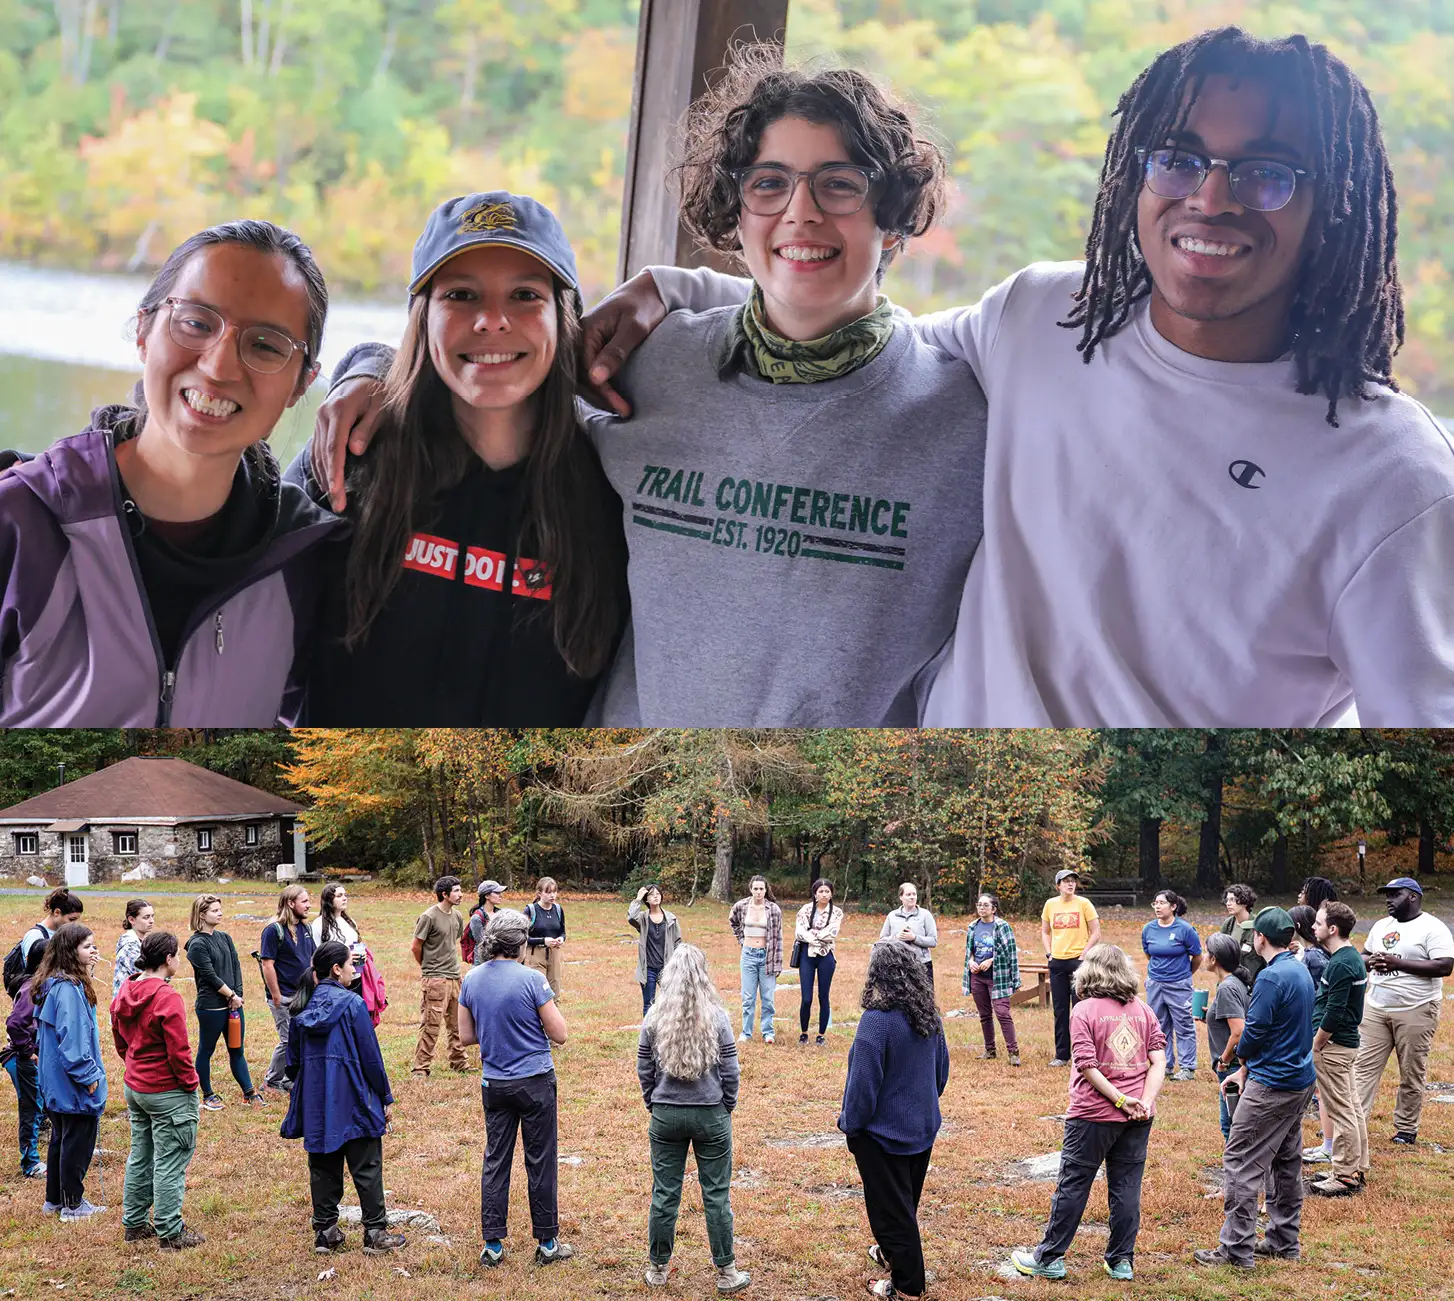 A record number of applicants sought the opportunity to cultivate leadership and Trail stewardship skills at the 2023 Emerging Leaders Summit